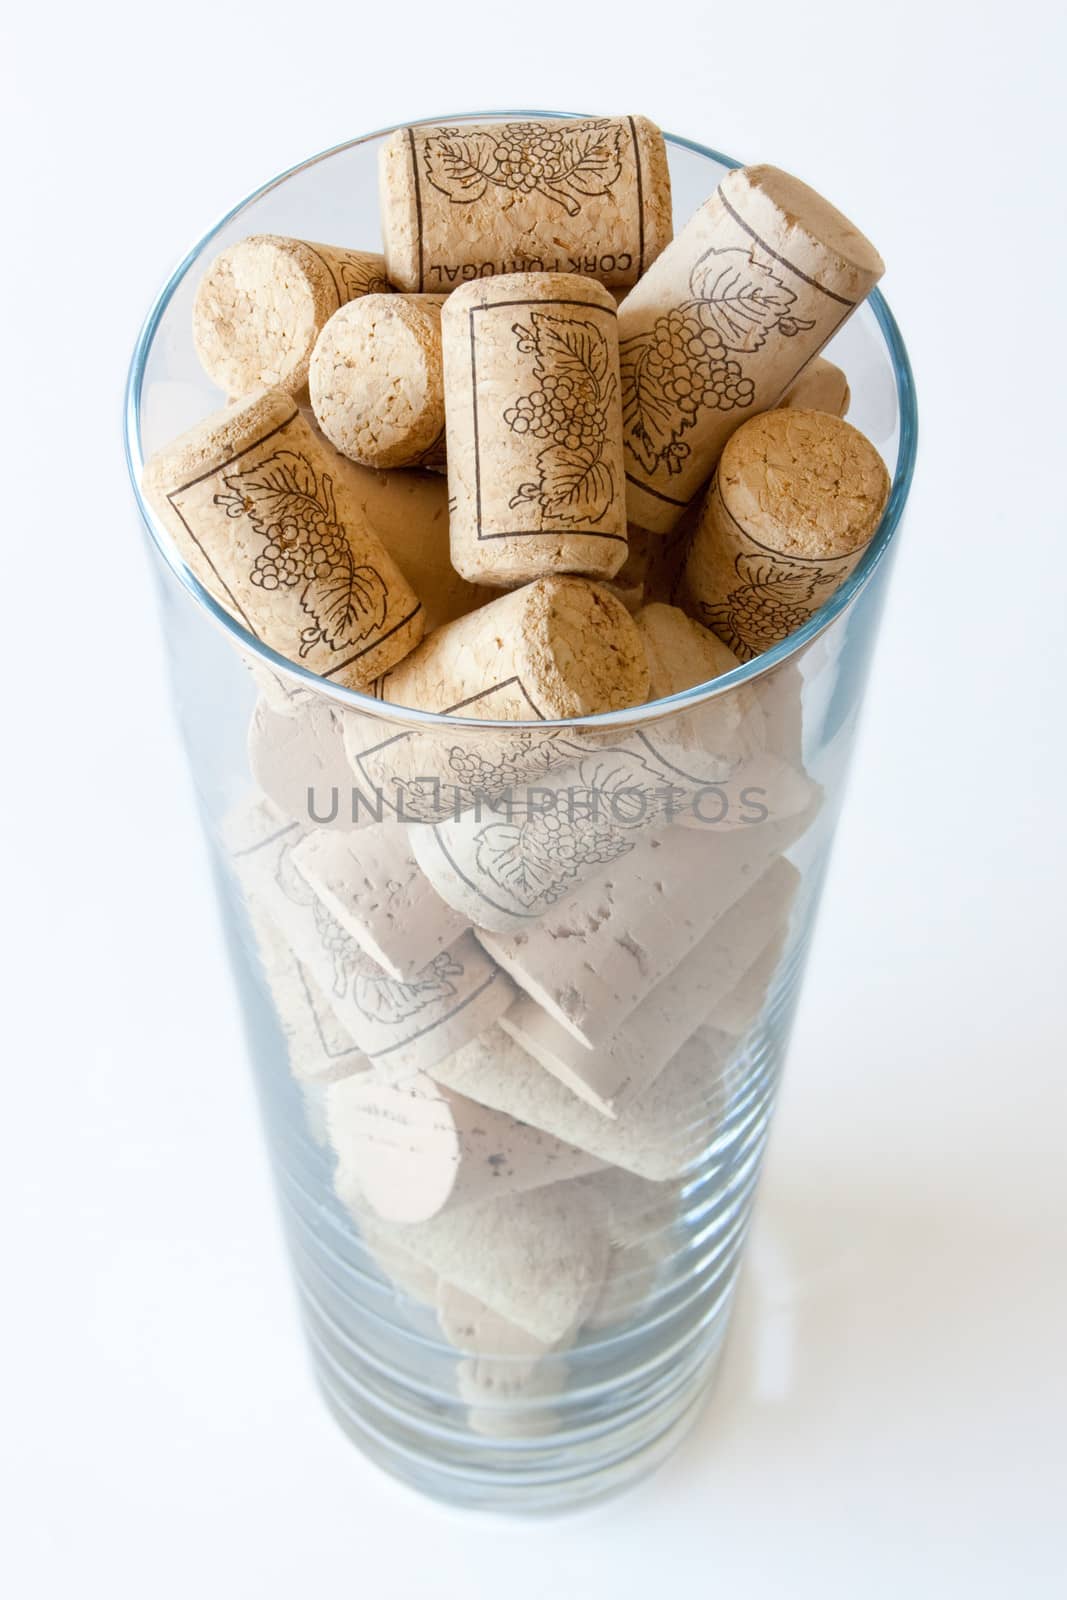 Wine cork in a glass on white background